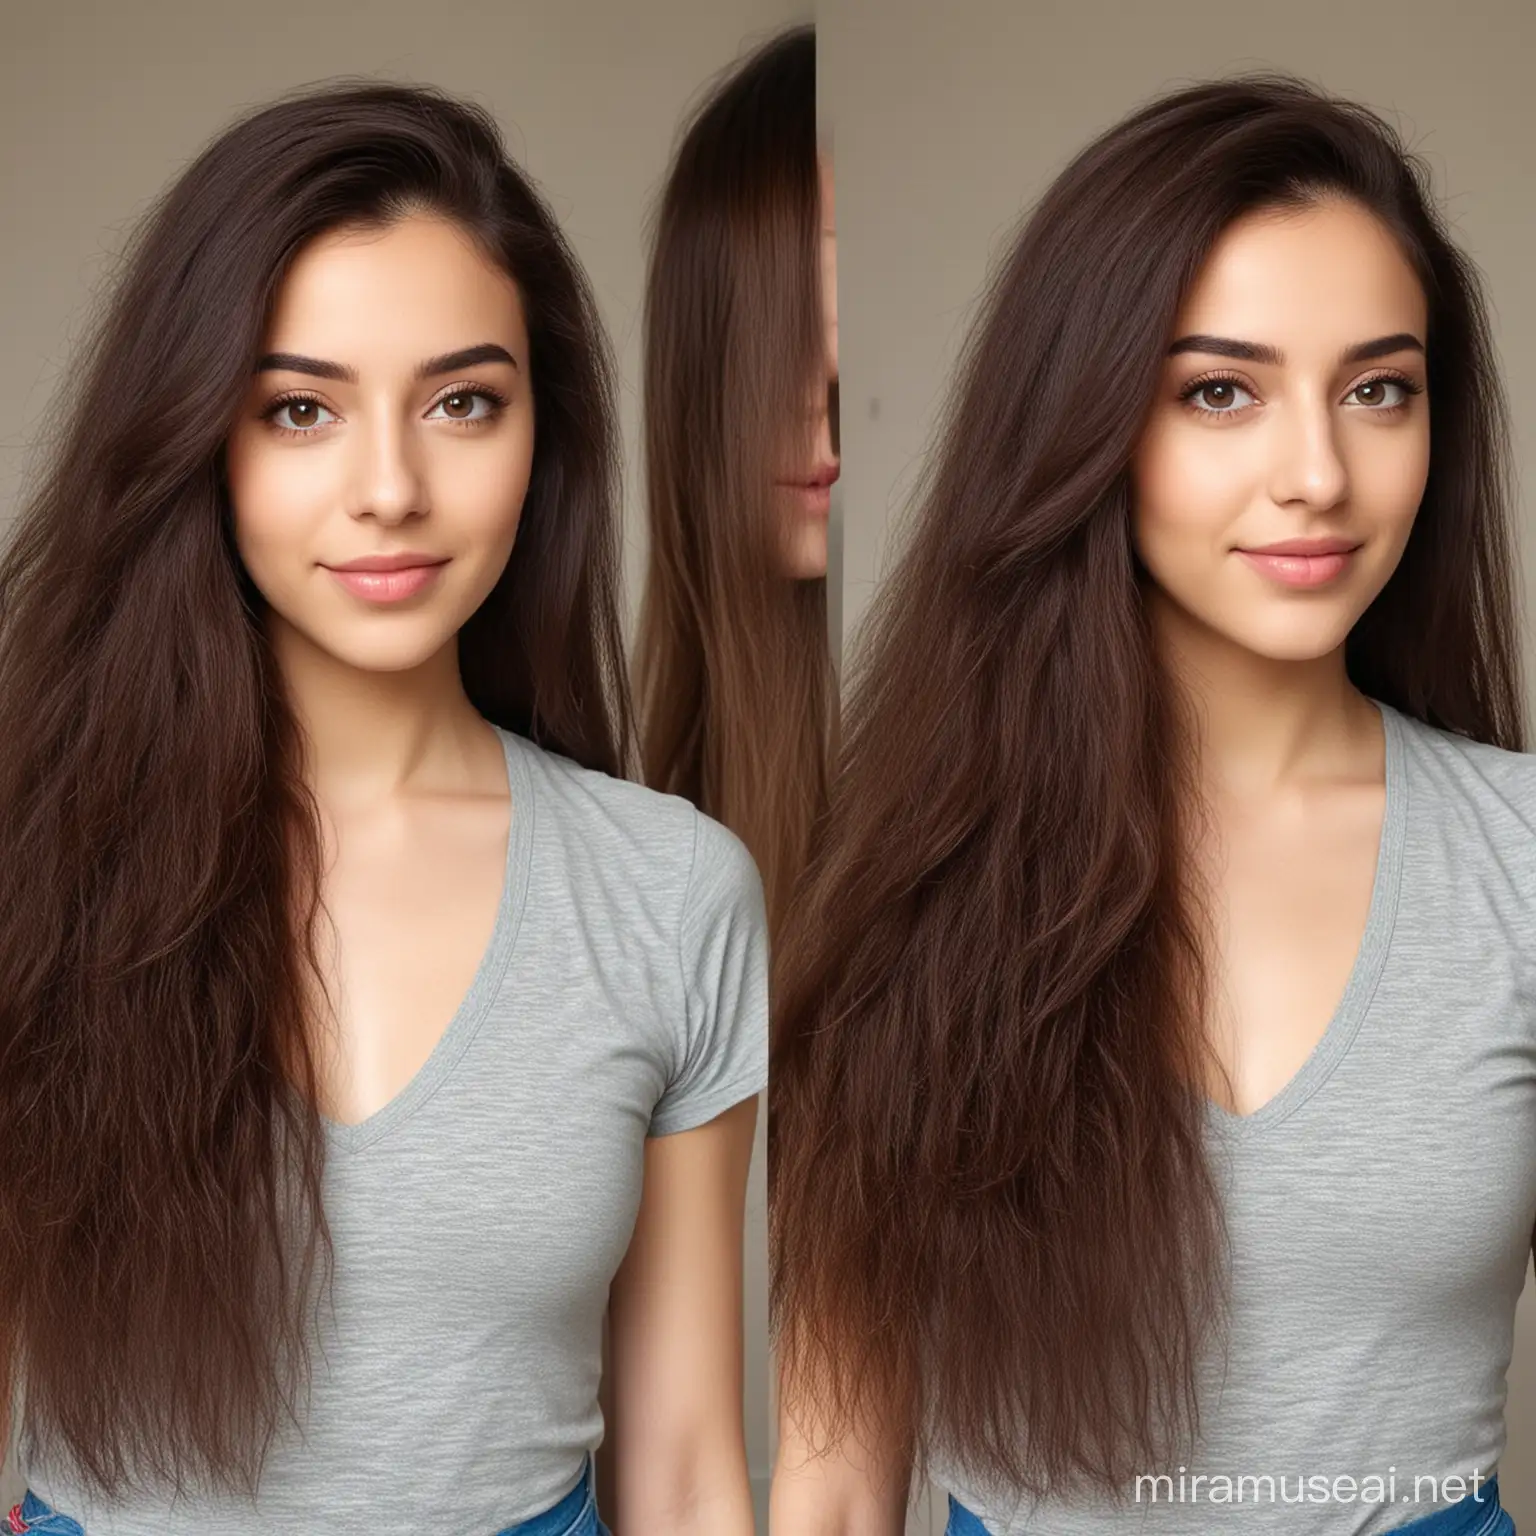 frizz and straight hair before and after arabian girl